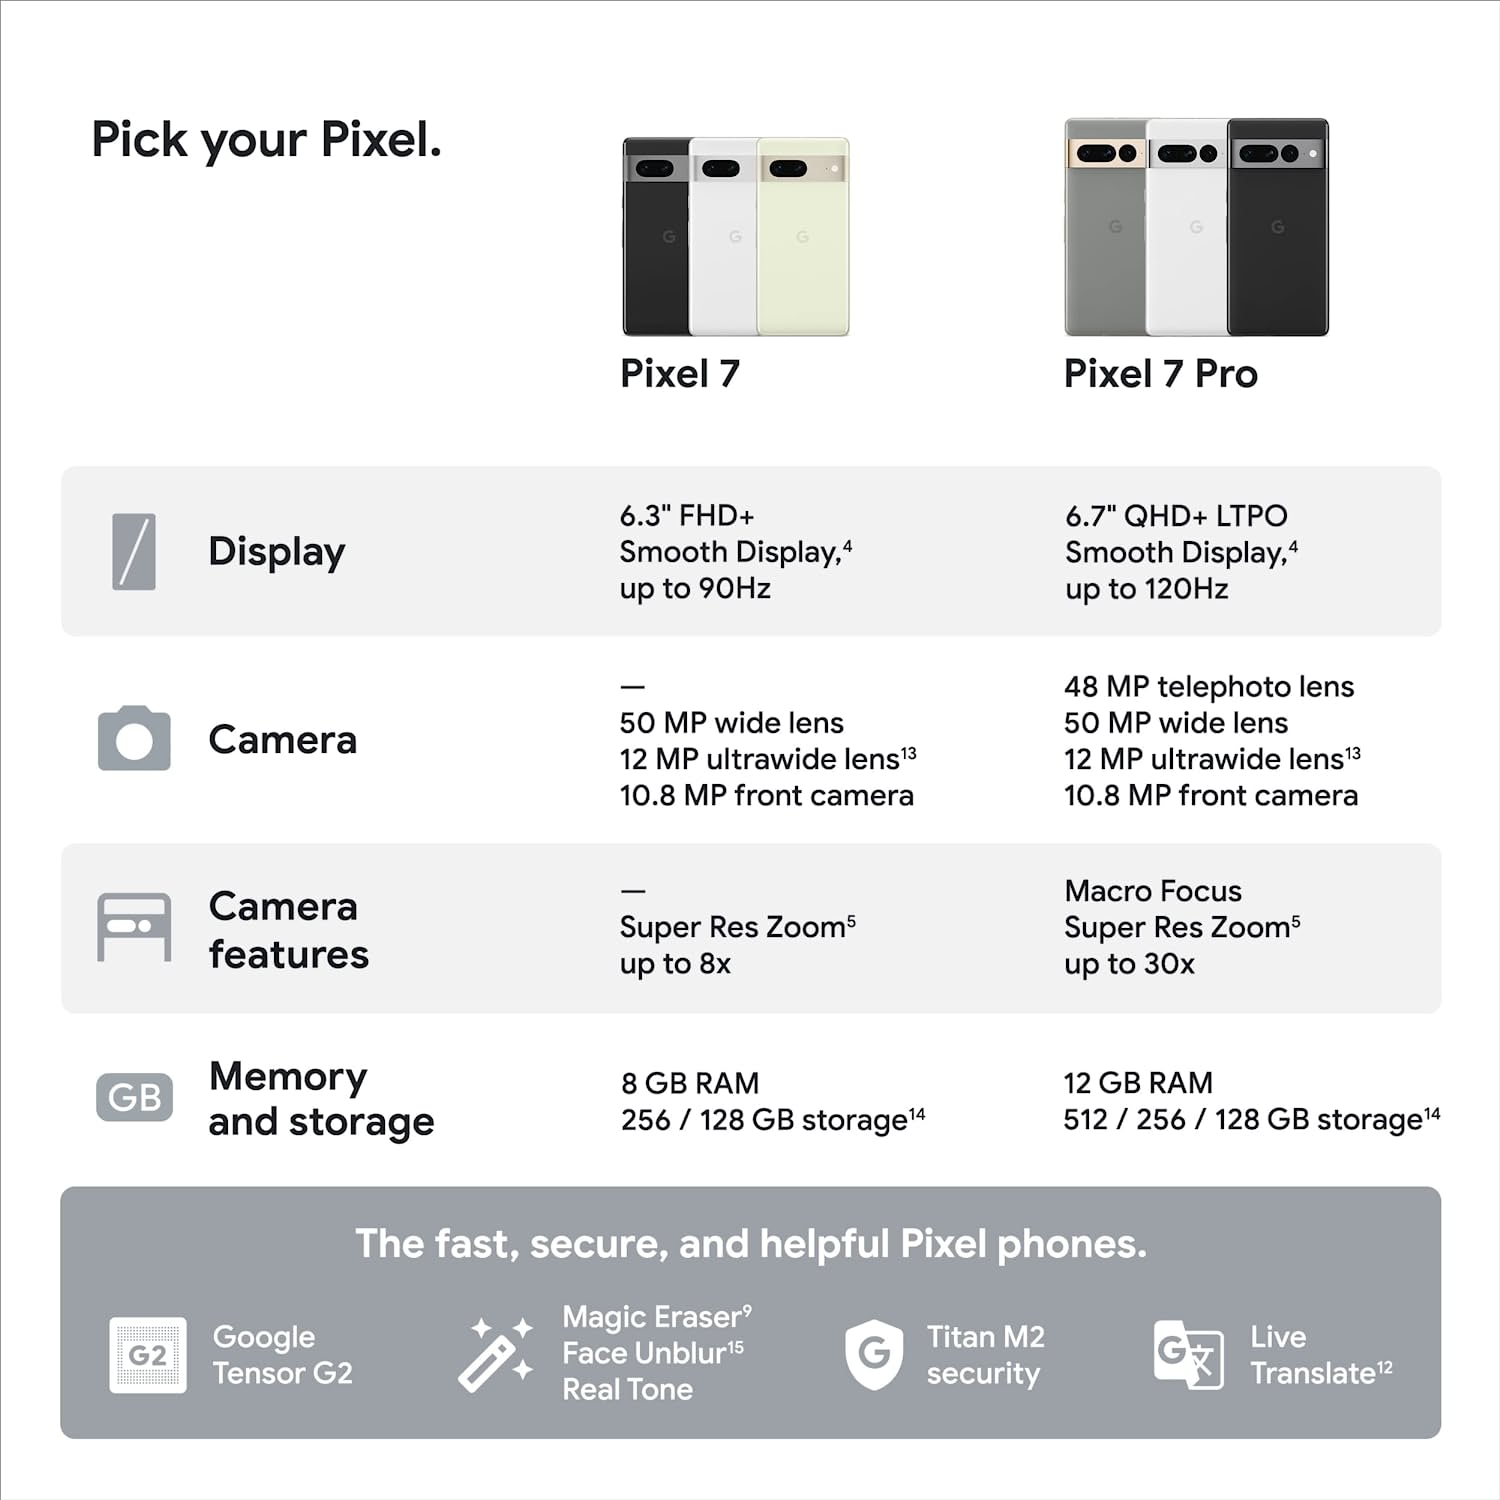 This image shows the specifications of the Google Pixel 7 and 7 pro.